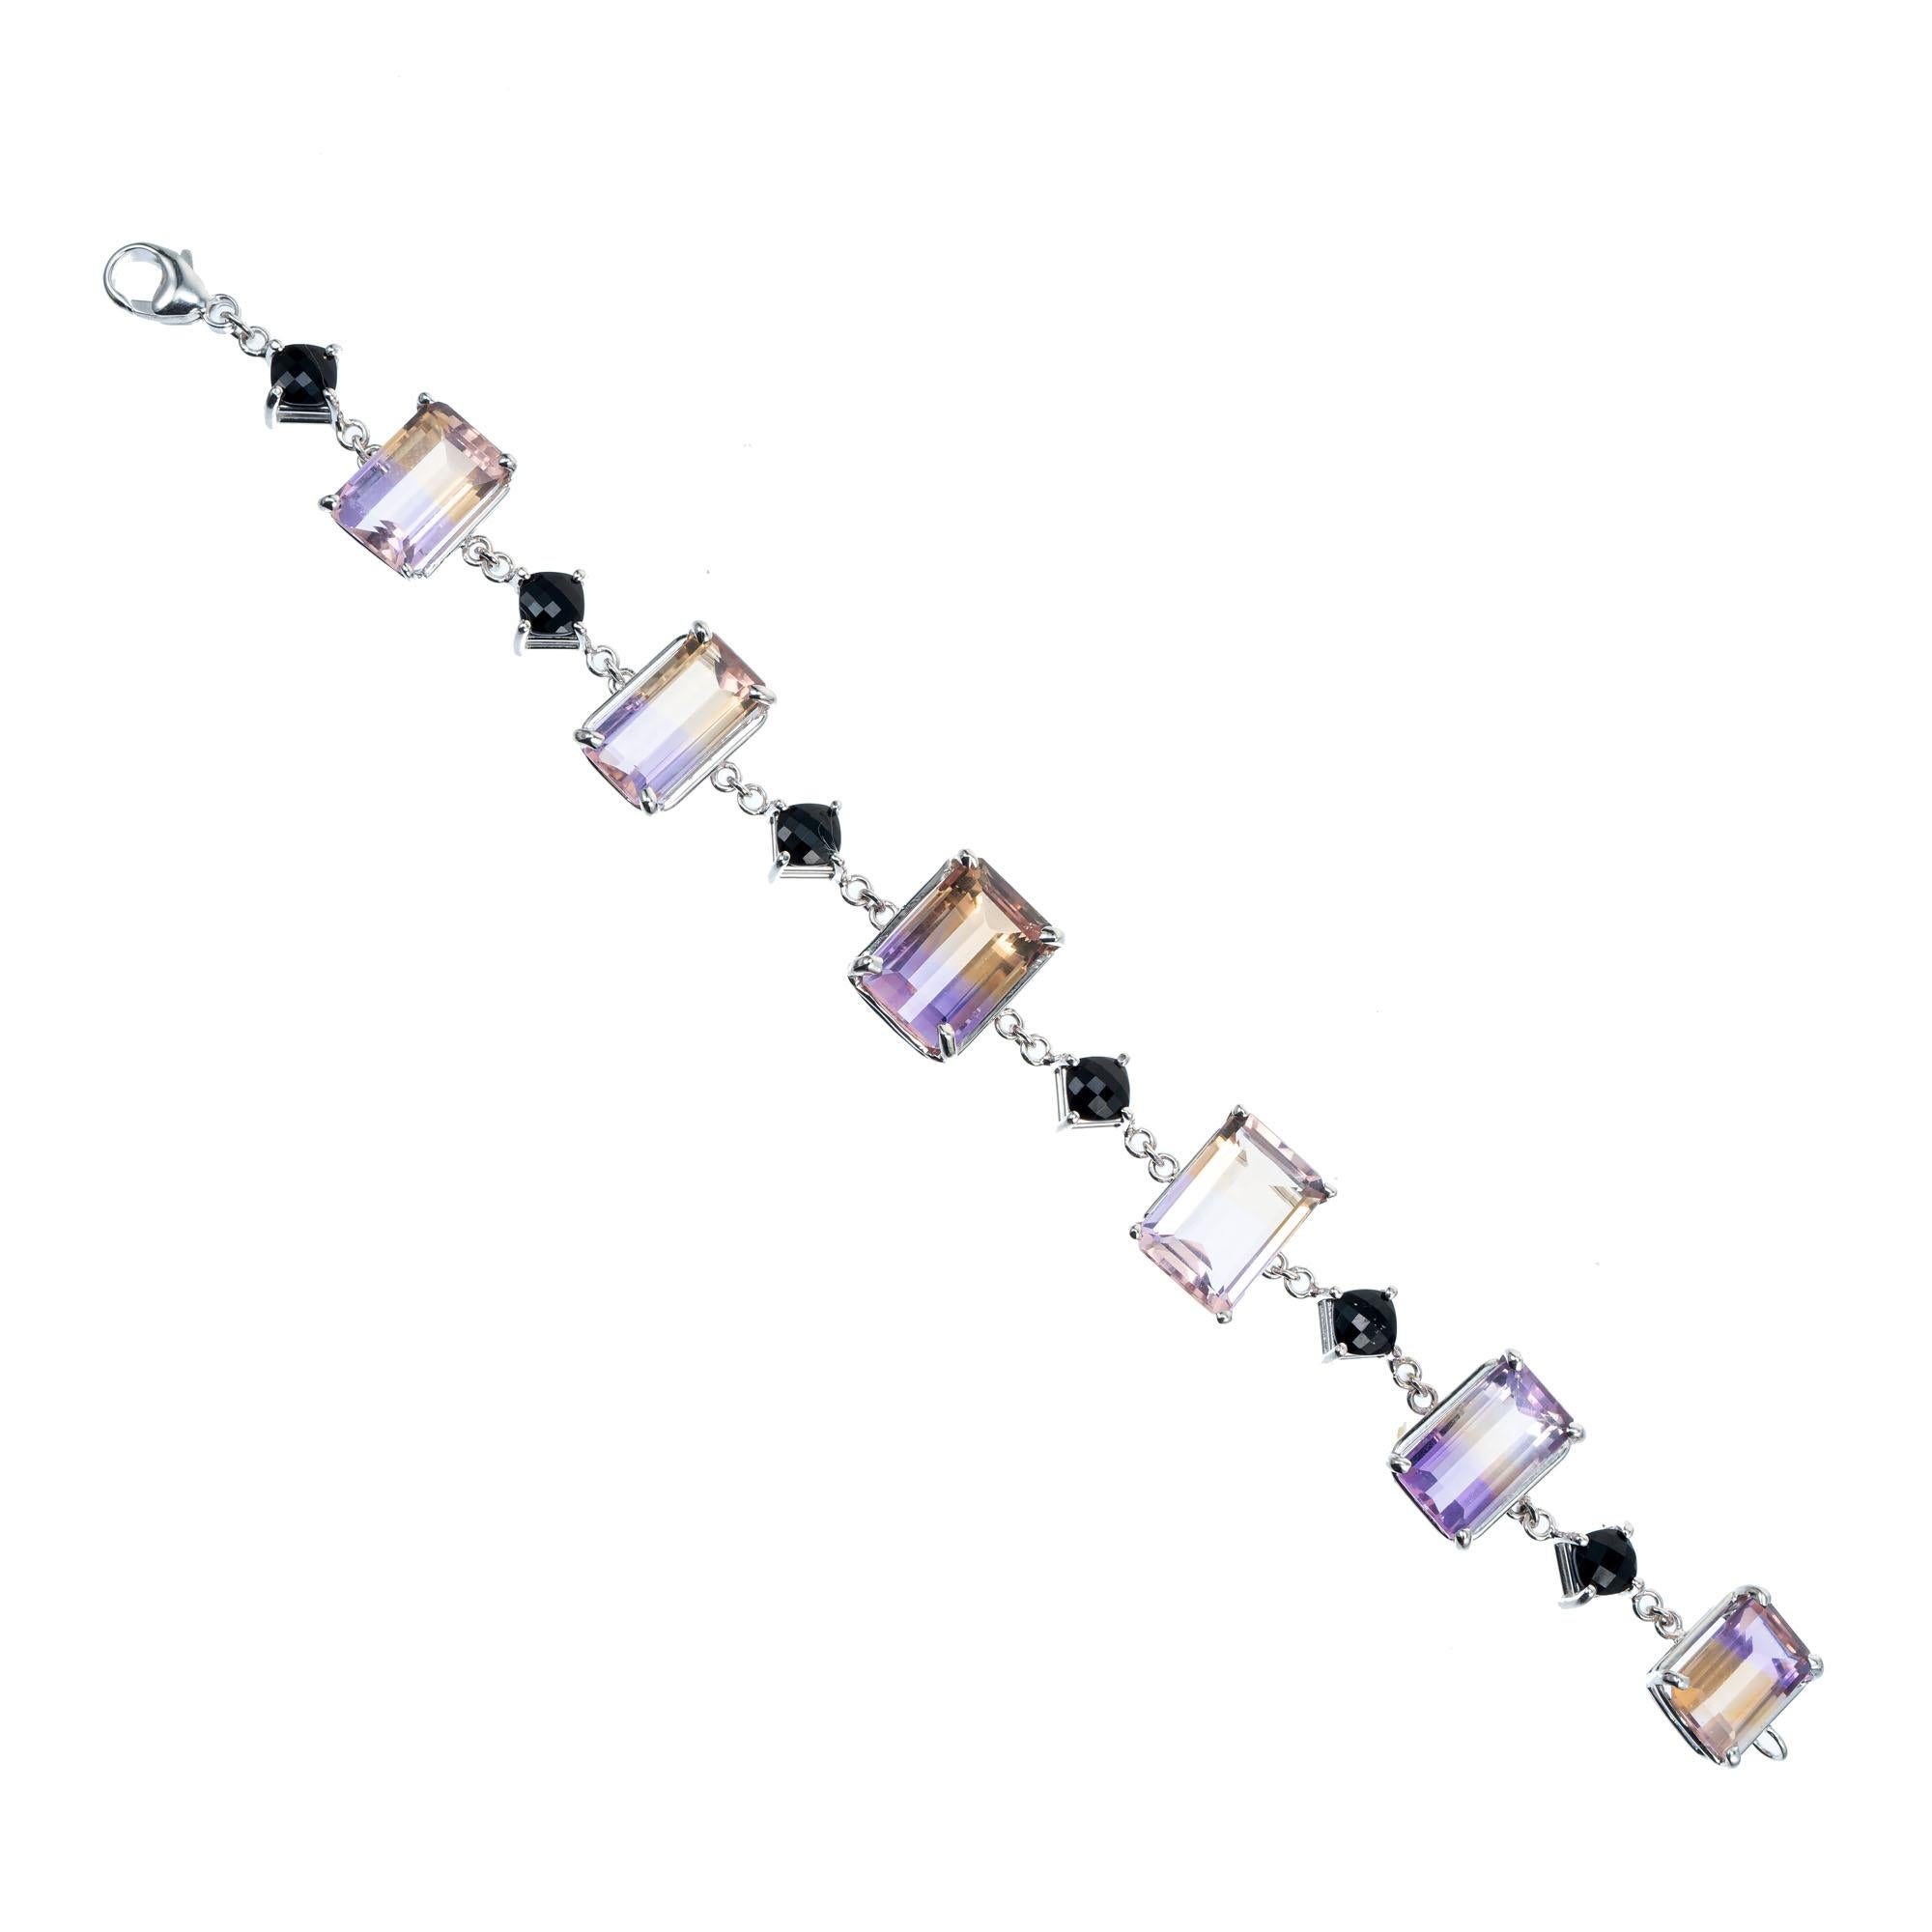 Ametrine and onyx bracelet. 6 emerald cut purple and yellow ametrines spaced by 6 quilt cut cabochon cushion cut black onyx in 14k white gold, 7 inches. From the Peter Suchy workshop

6 emerald cut purple to yellow ametrine, approx. 40.00cts
6 quilt